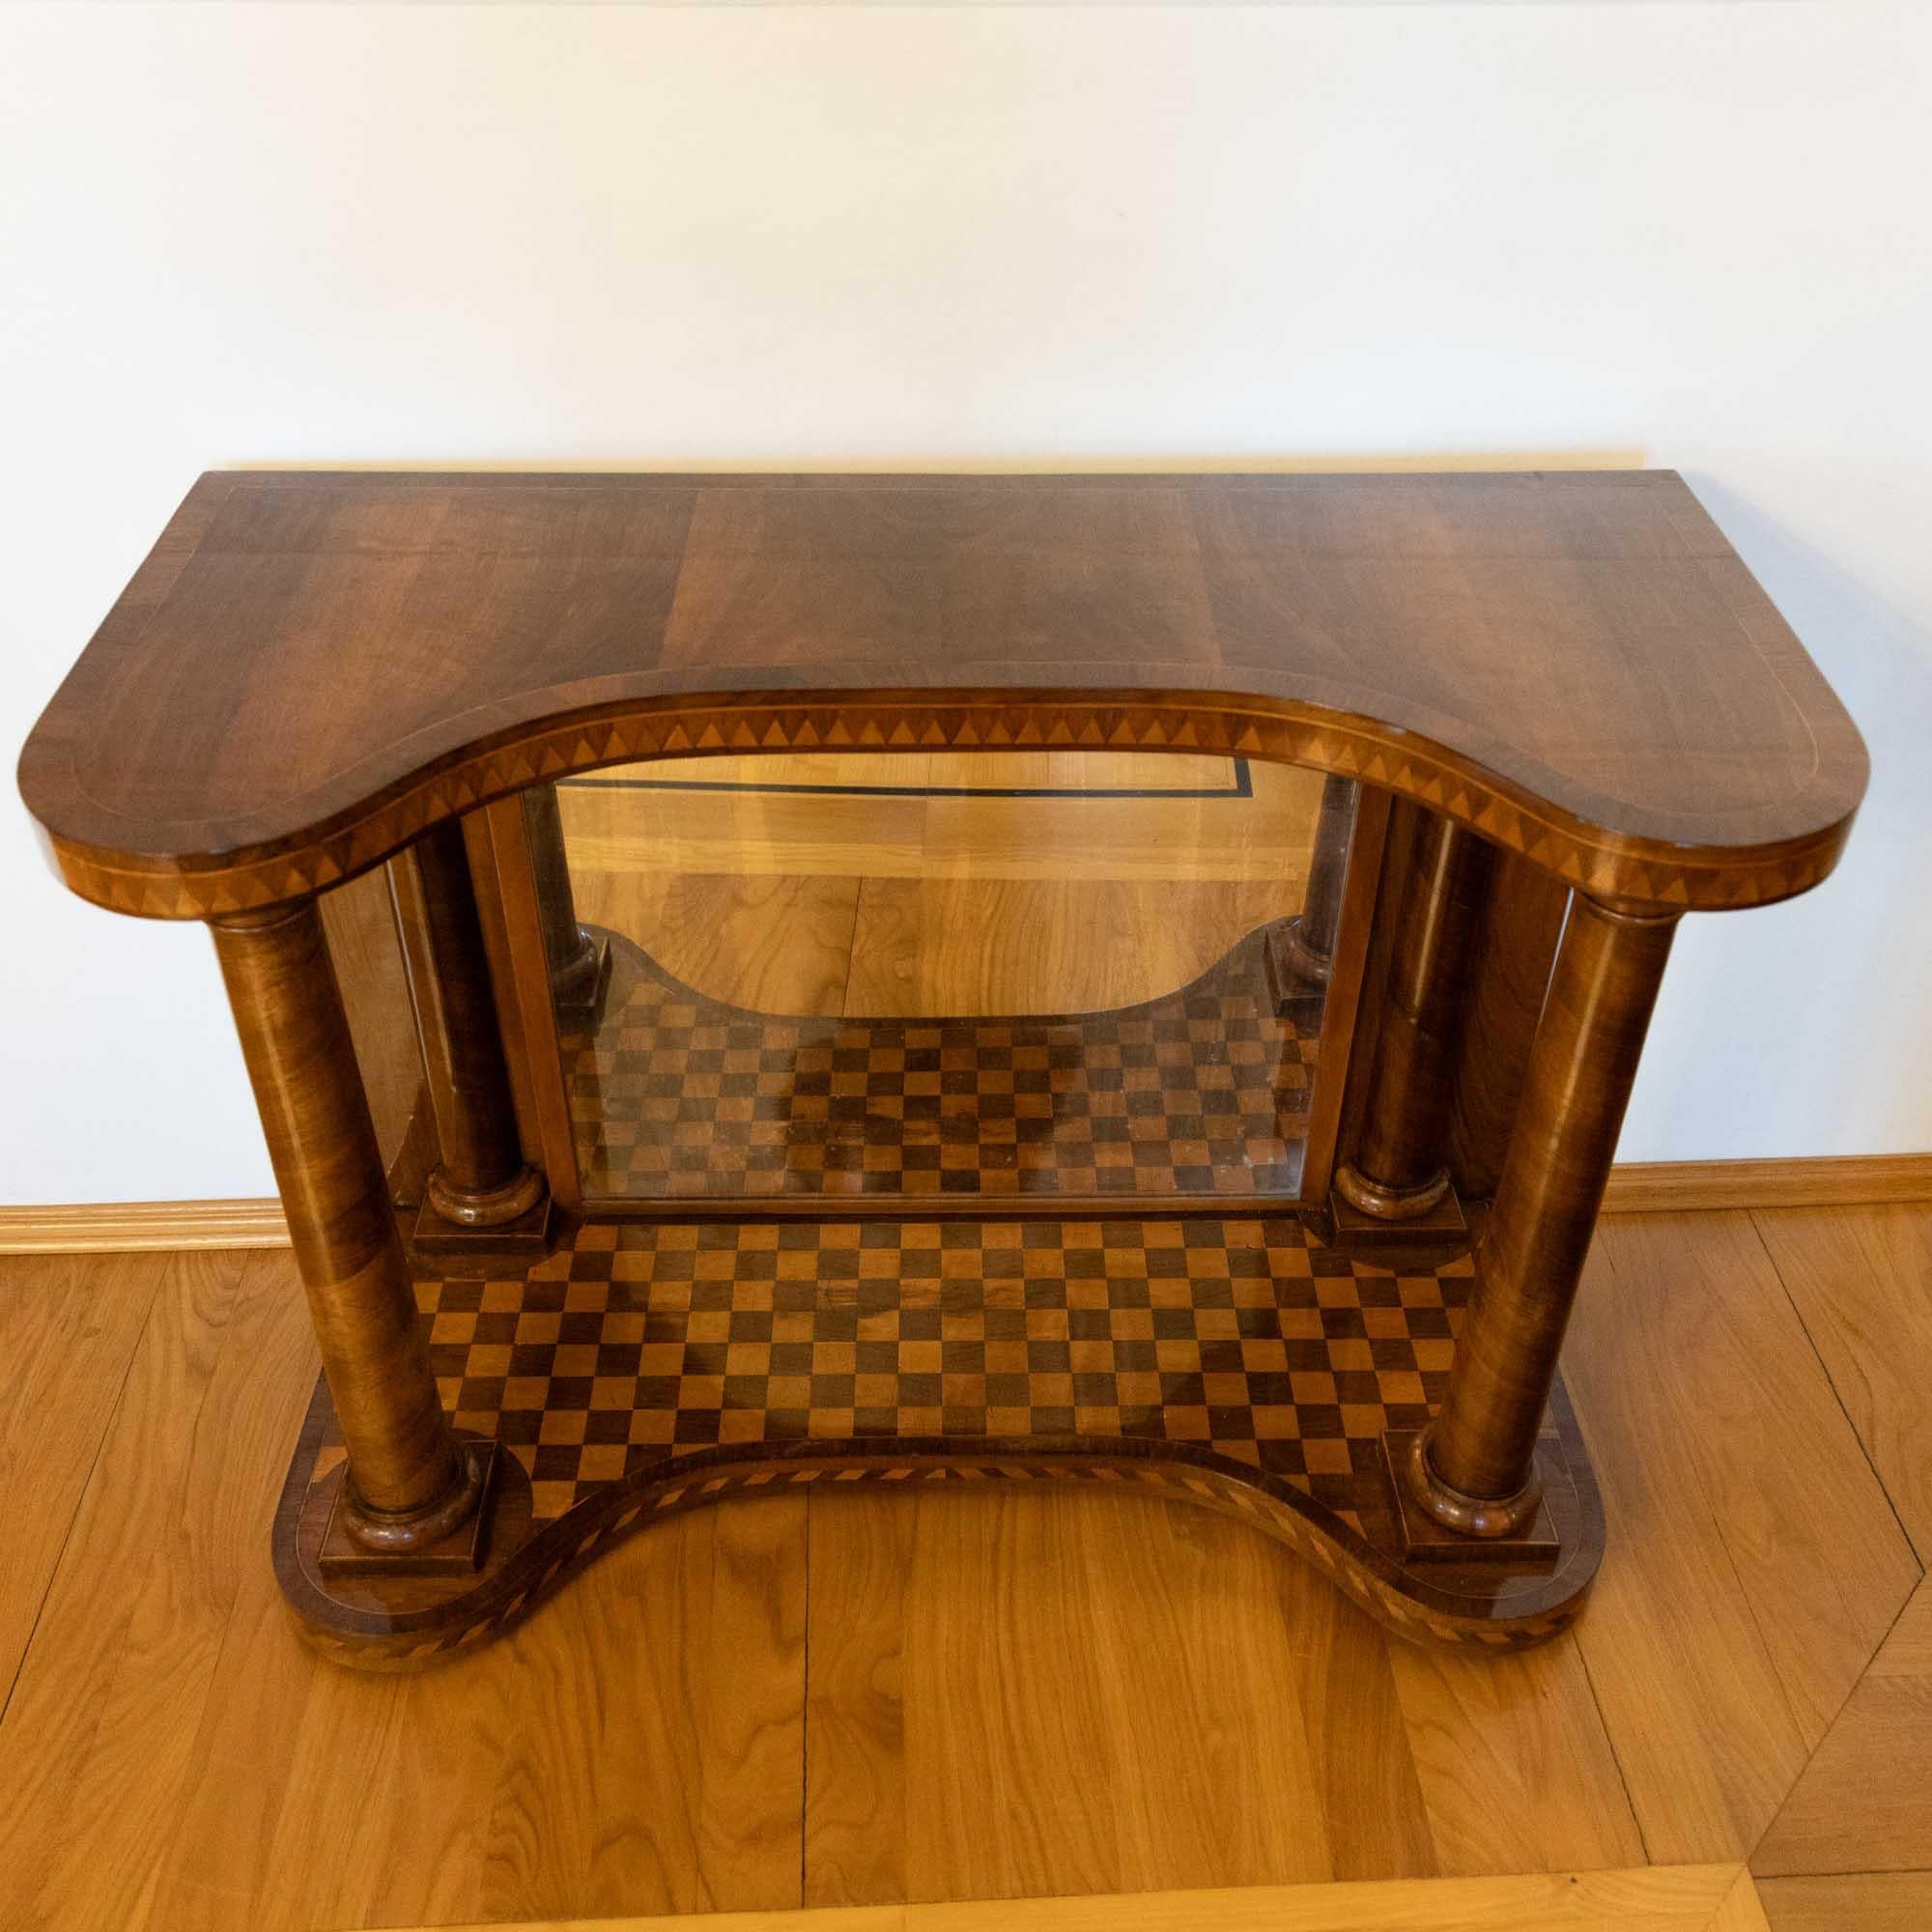 Pair of Parquetry Console Tables with Mirrors, Mid-19th Century For Sale 3